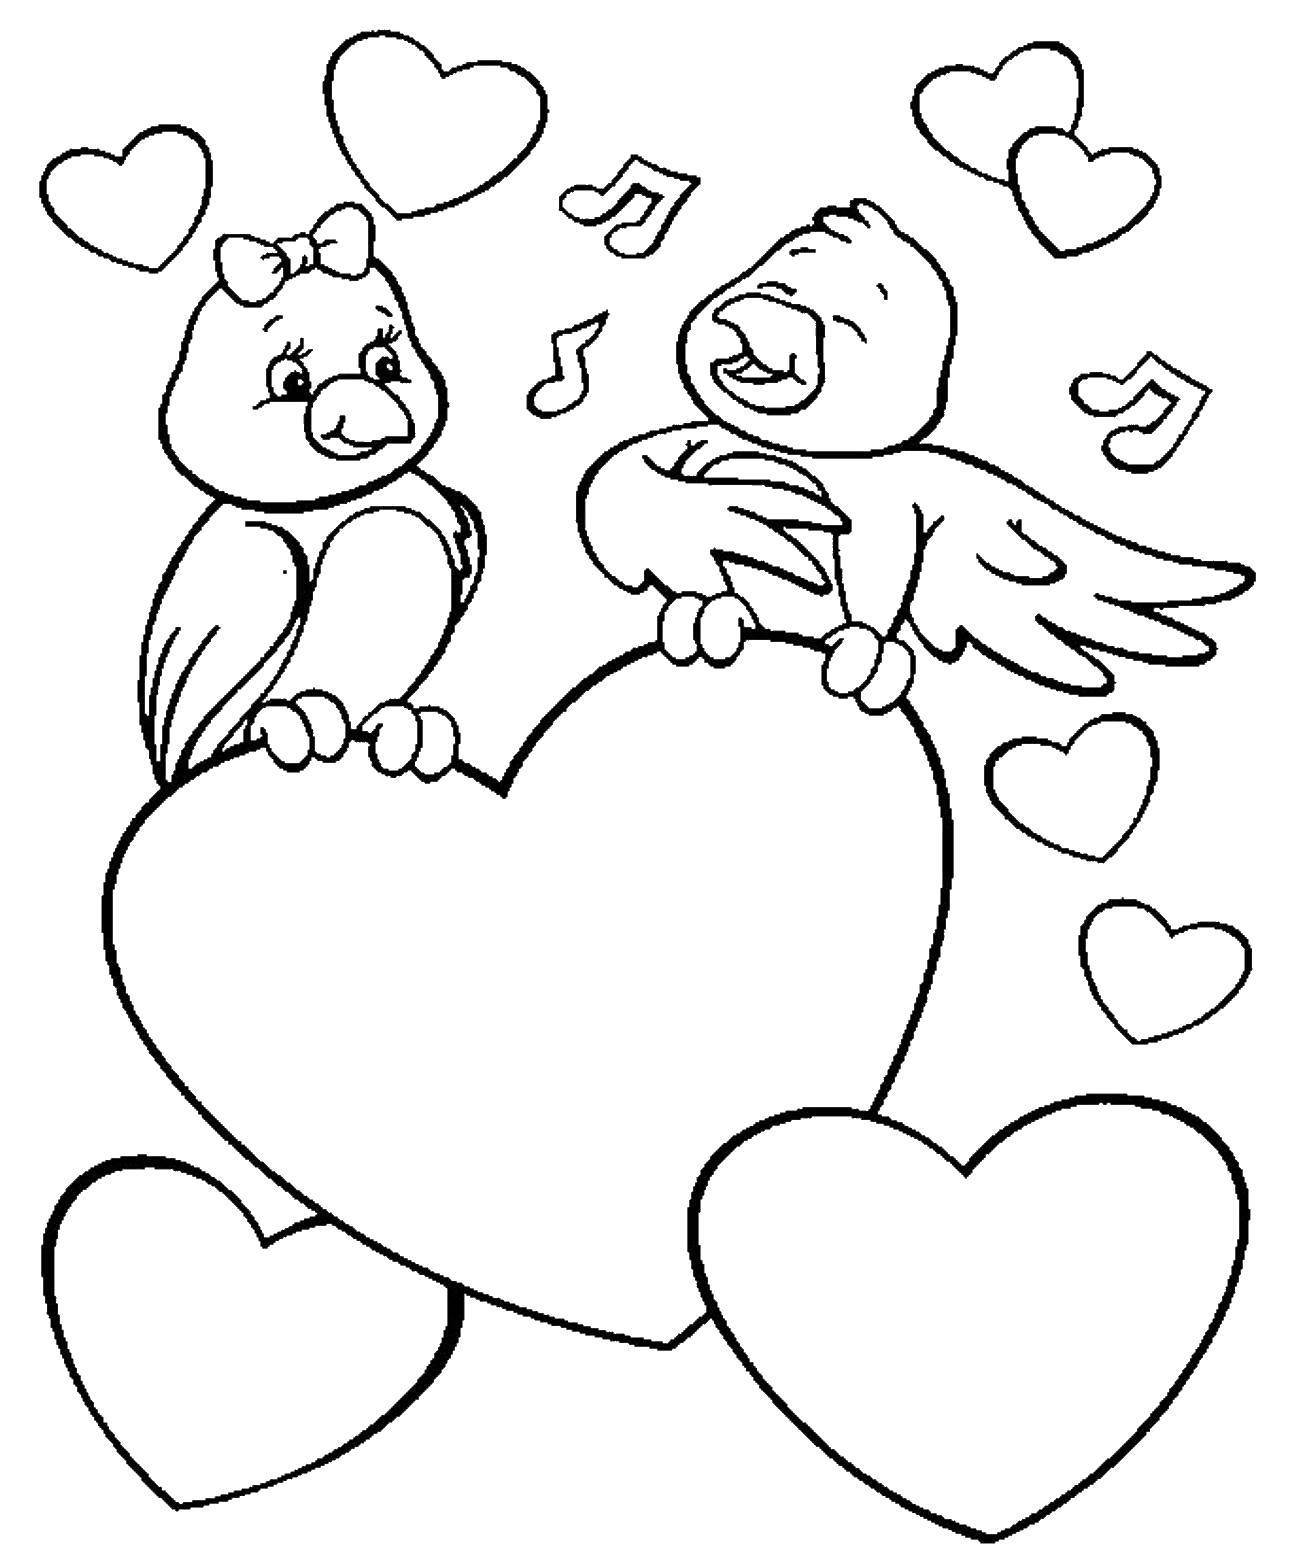 Coloring The birds are singing about love. Category I love you. Tags:  bird , love song.